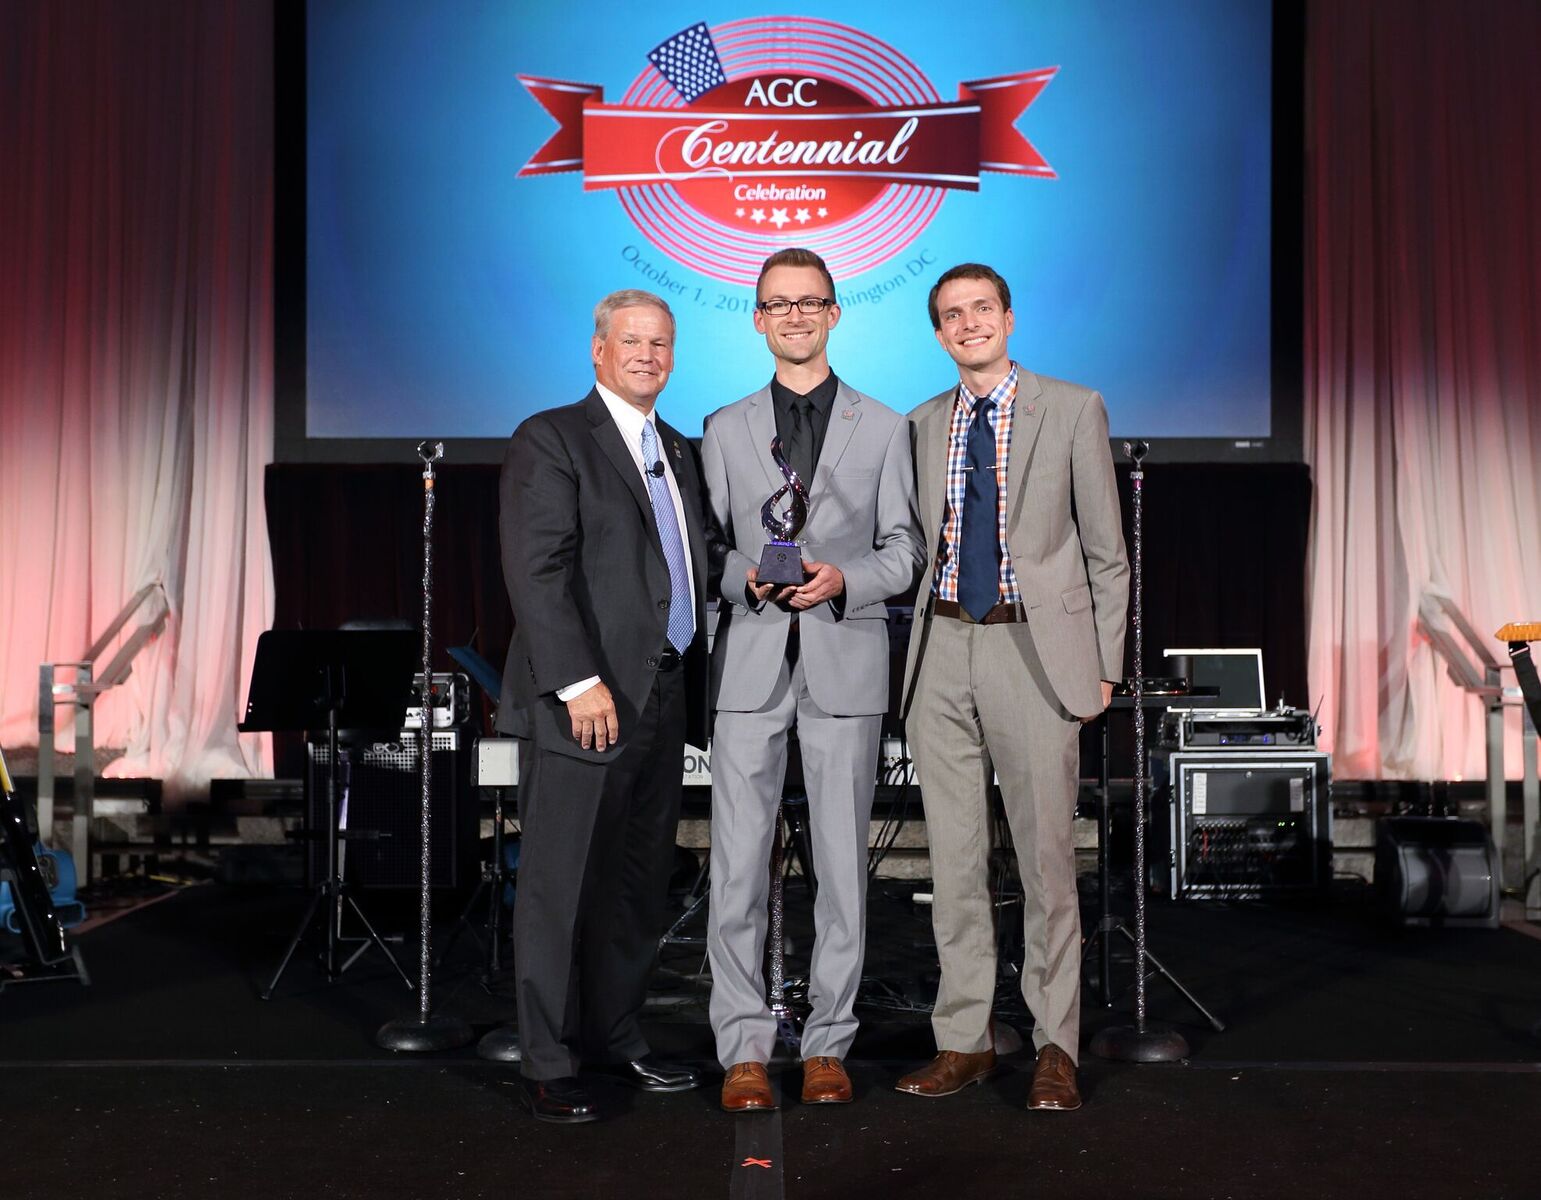 Virtual Construction App Developer Ryan Haines (center) and Sr. Virtual Construction Engineer Eric Cylwik (right) accept the AGC Innovation 3rd-place Award